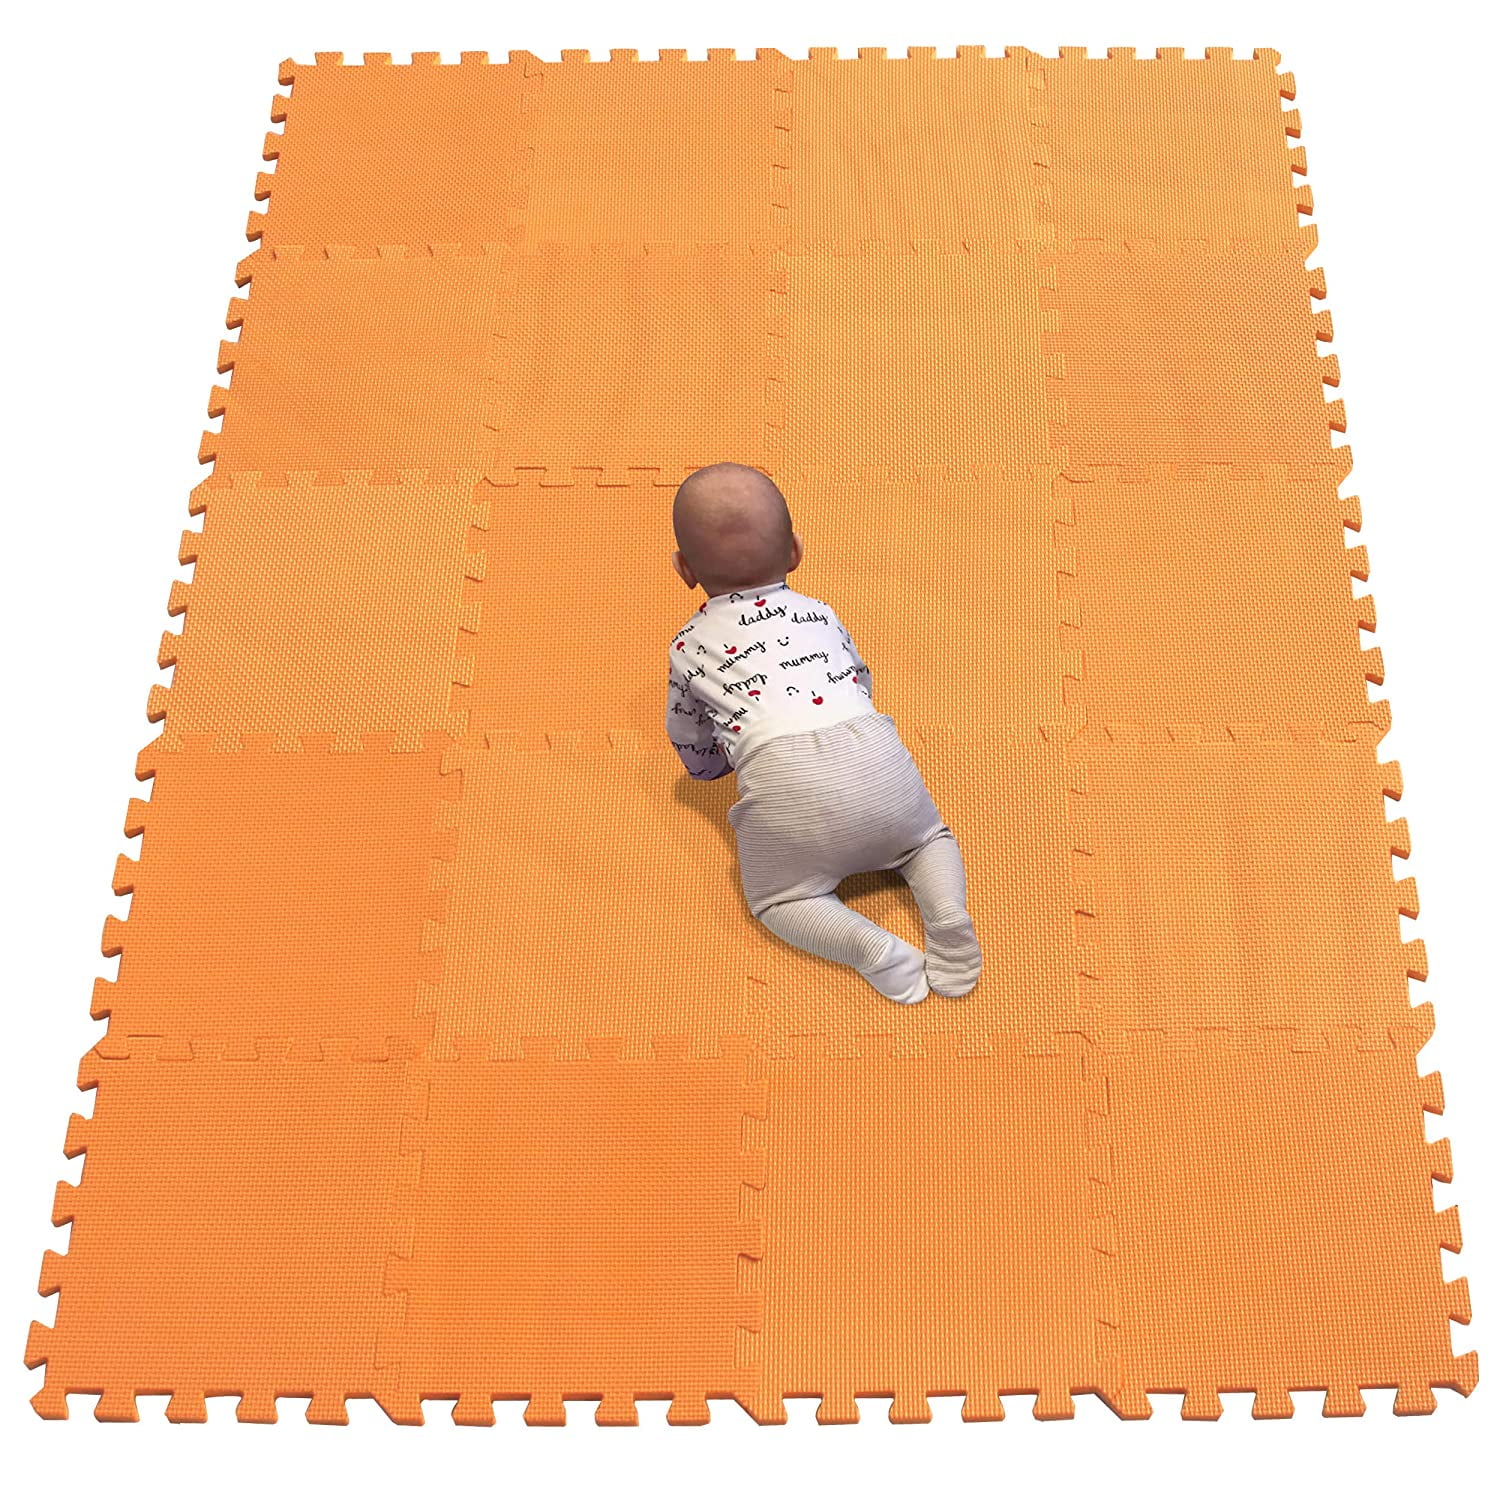 Infant Indoor Activity Center for Tummy Time Multicolor Toddler Number Crawling Mat Kids Puzzle Exercise Play Mat US Stock Baby EVA Foam Games Mat 36 pcs Interlocking Floor Tiles 